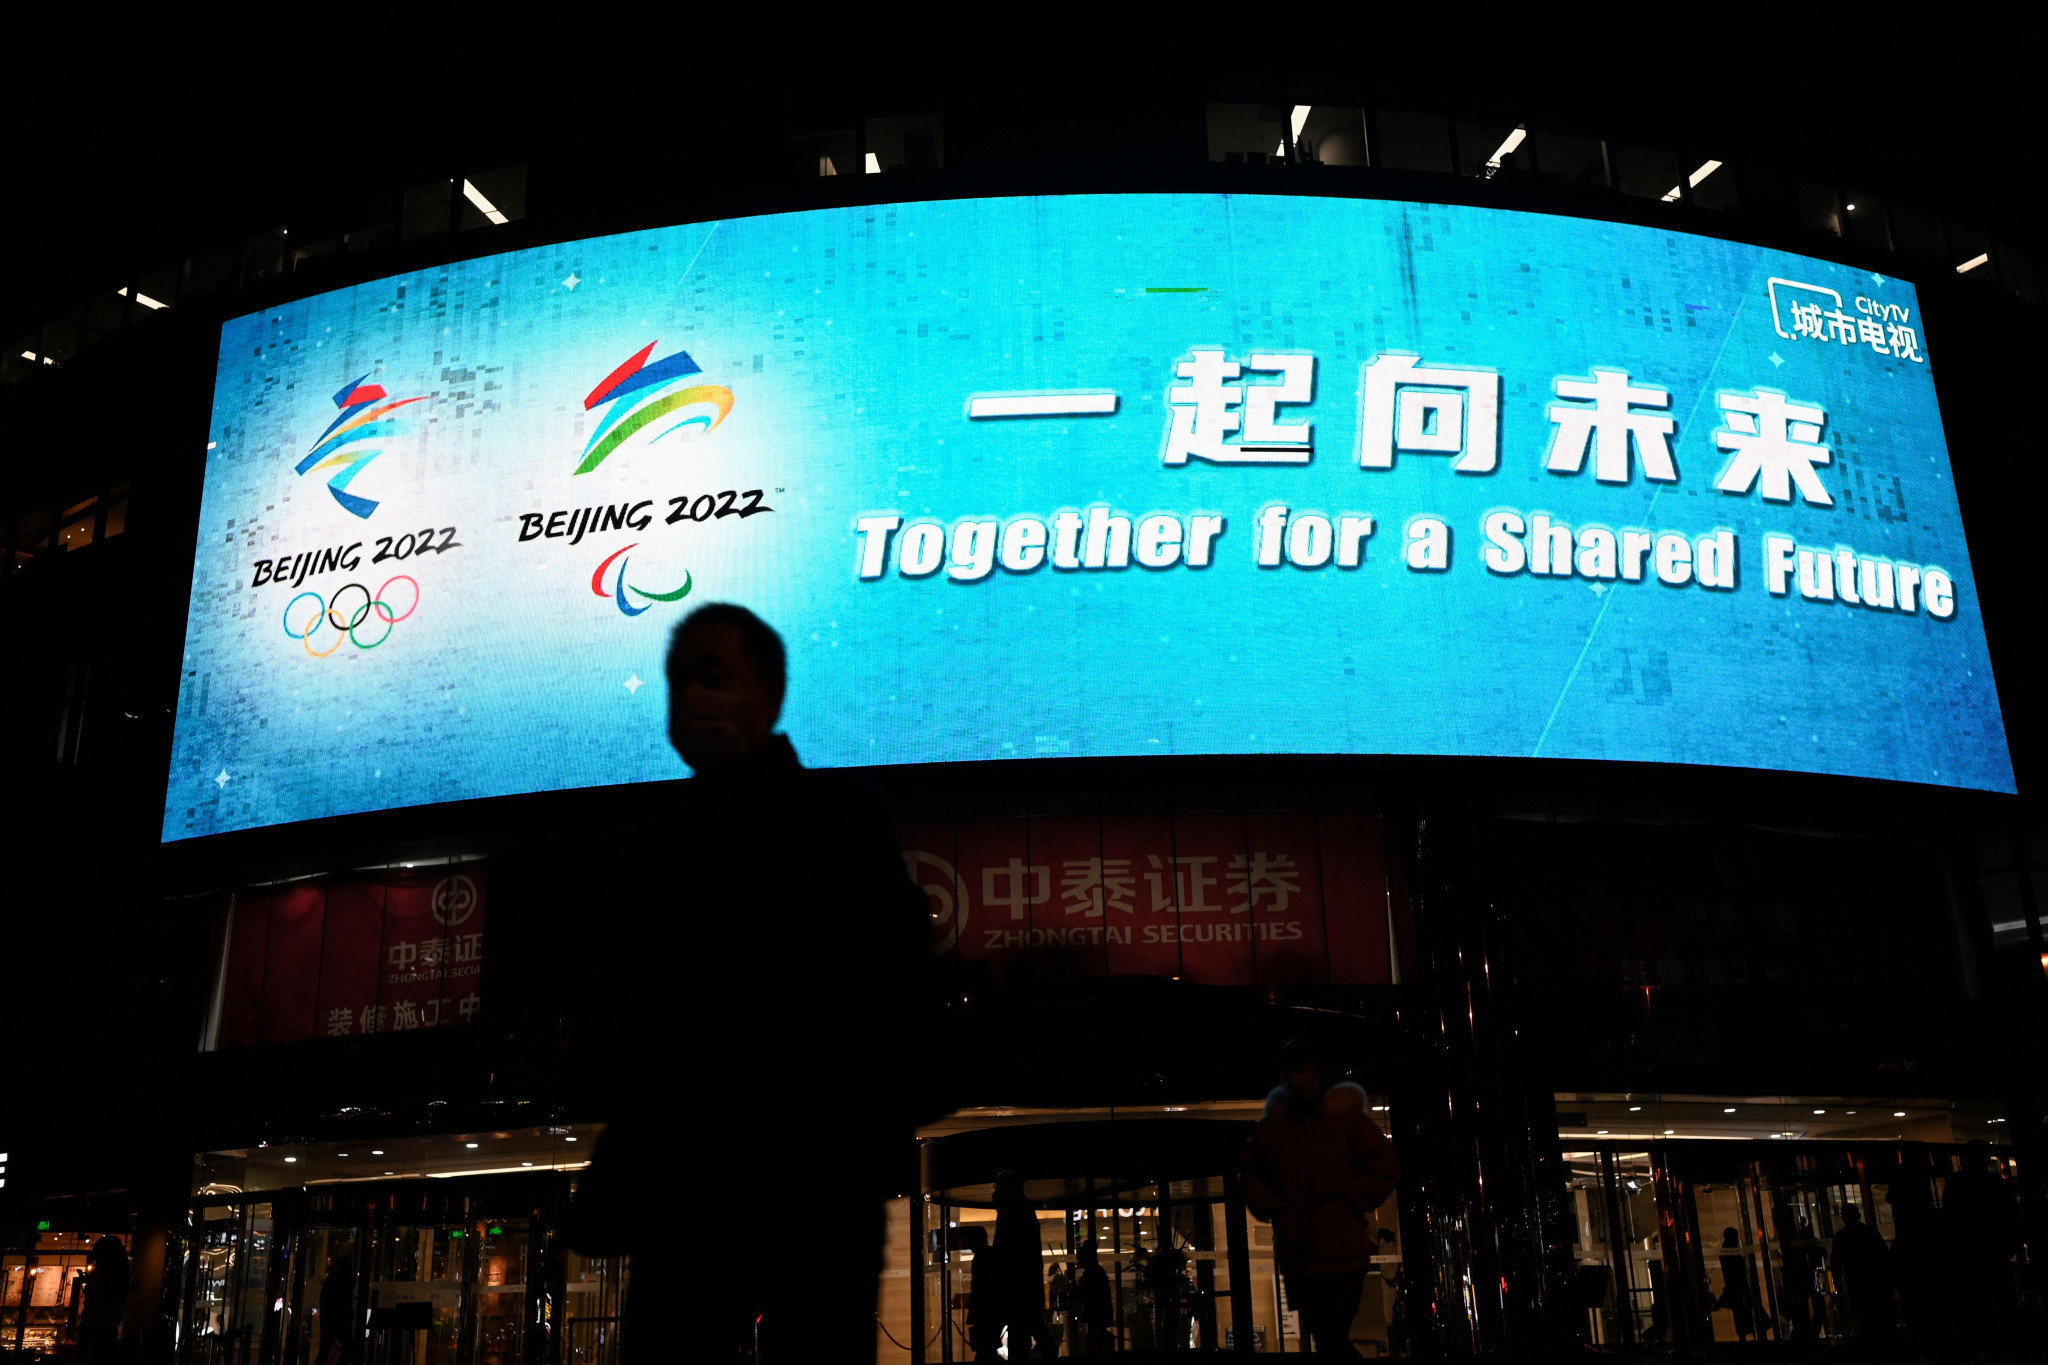 Australia, Canada and Britain join US in diplomatic boycott of Beijing 2022 Winter Olympics